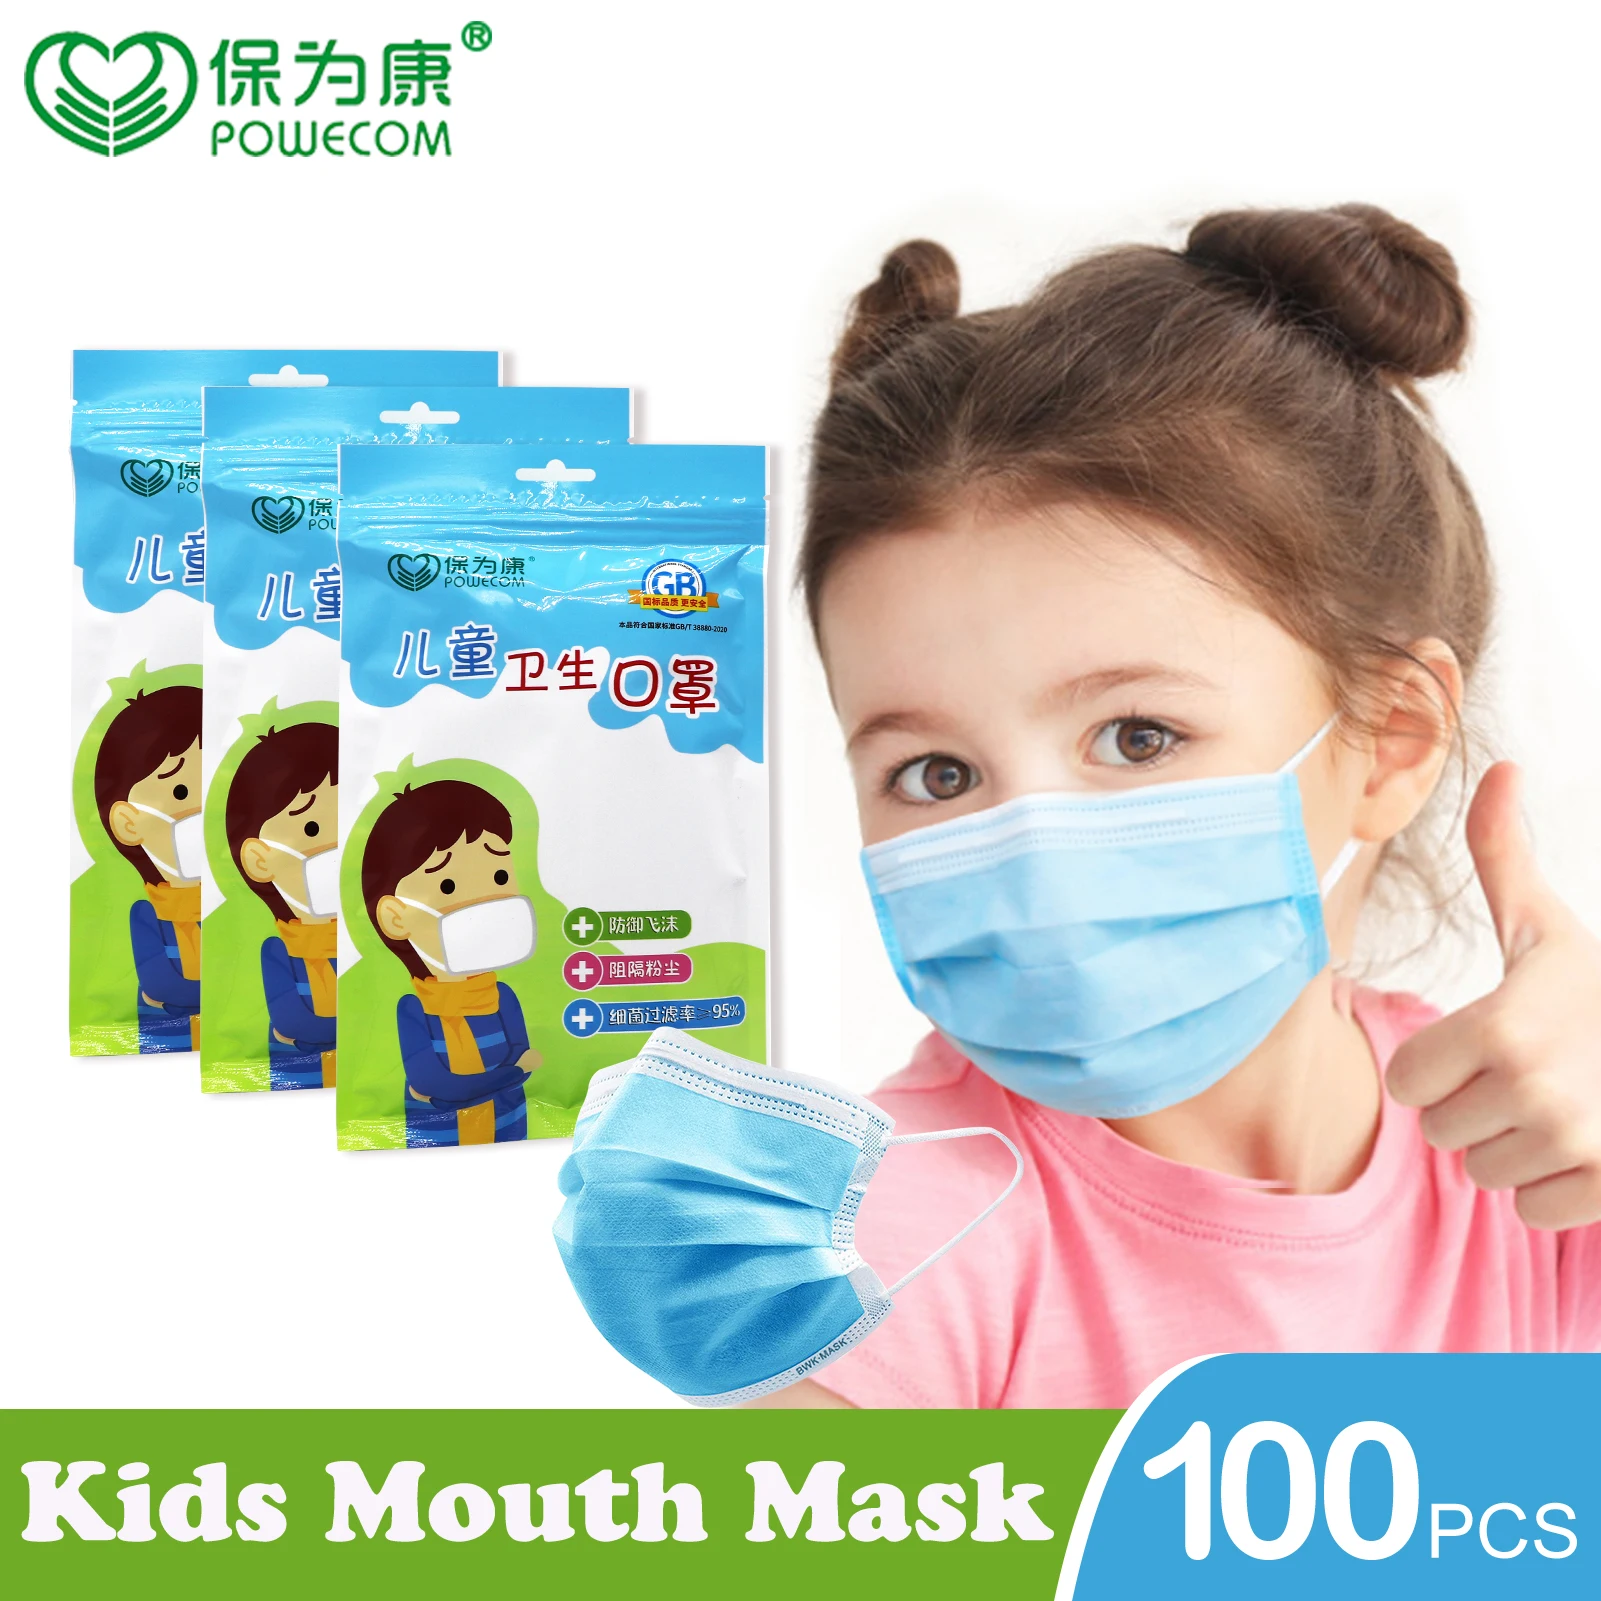 

POWECOM 100/50Pcs Kids Disposable Mask 3 Layer Filter Comfortable Mouth Mask Breathable Anti-Fog Mask Face Shield Respirator